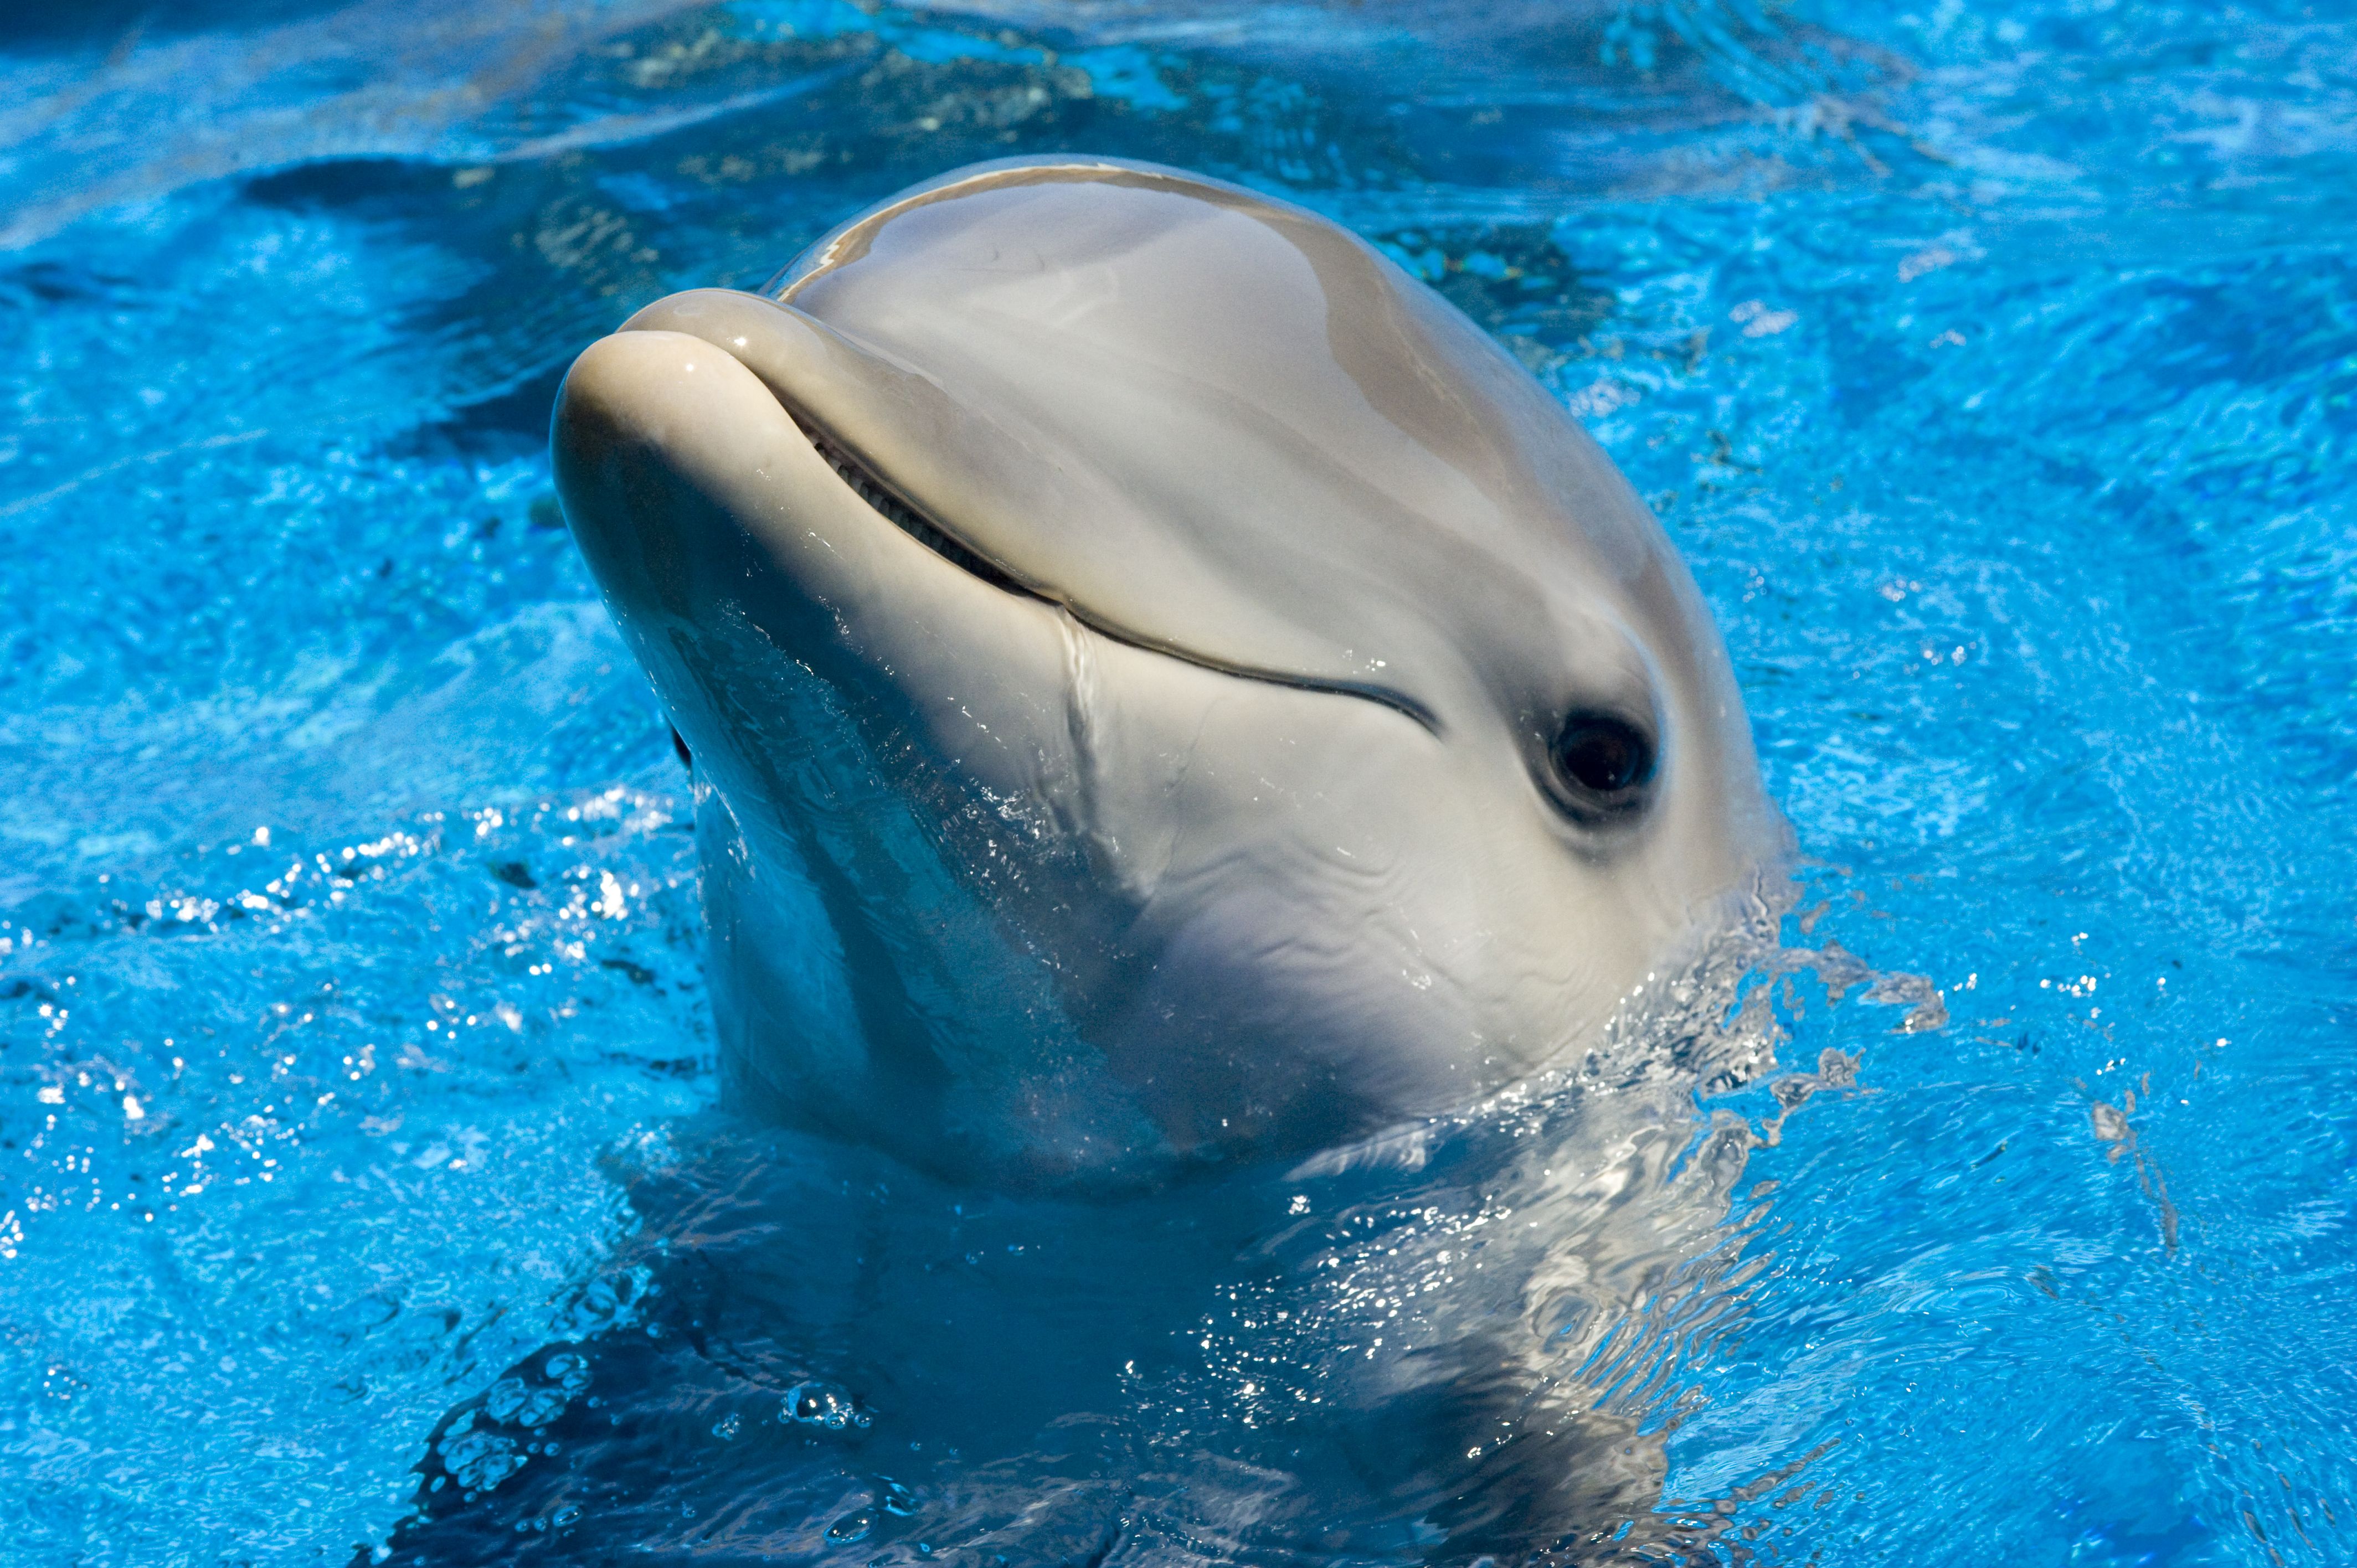 Dolphin Cute, HD Animals, 4k Wallpapers, Image, Backgrounds, Photos.